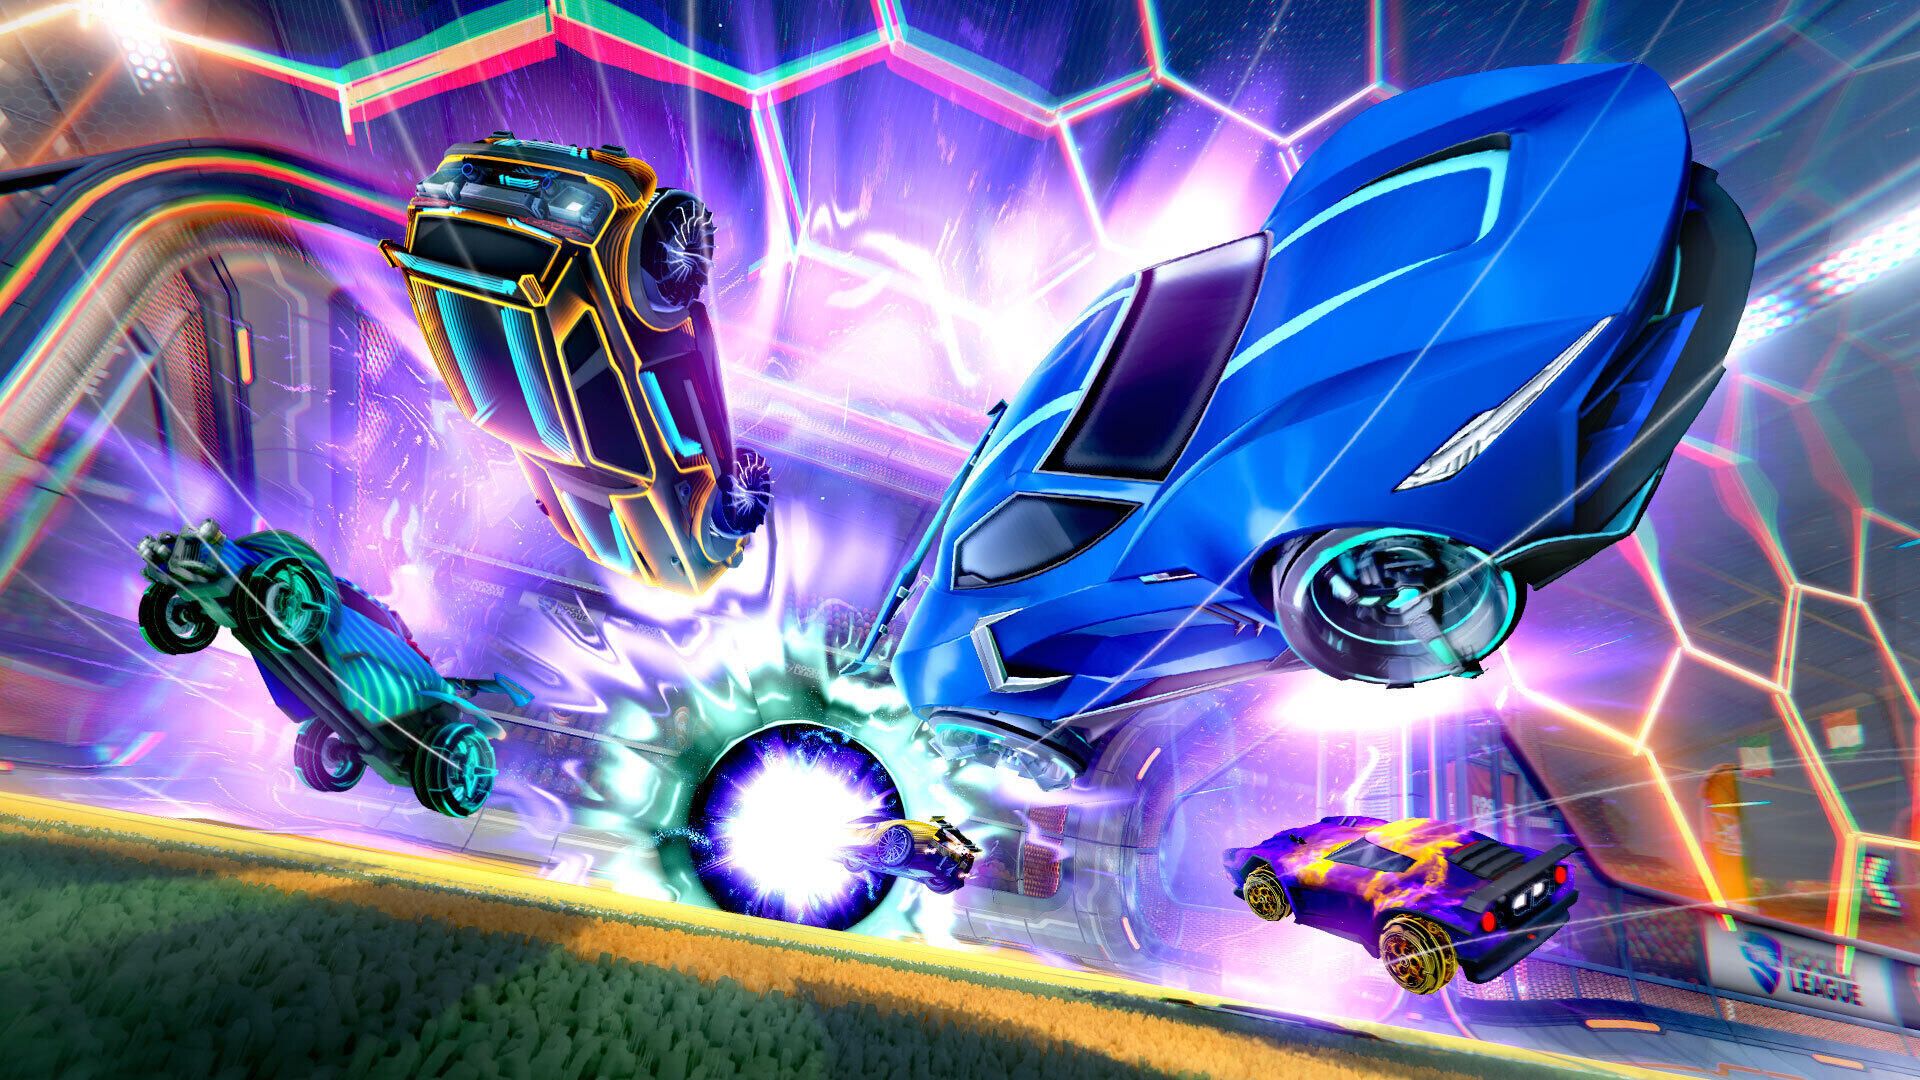 New Rocket League ranks and streamlined schedule coming soon